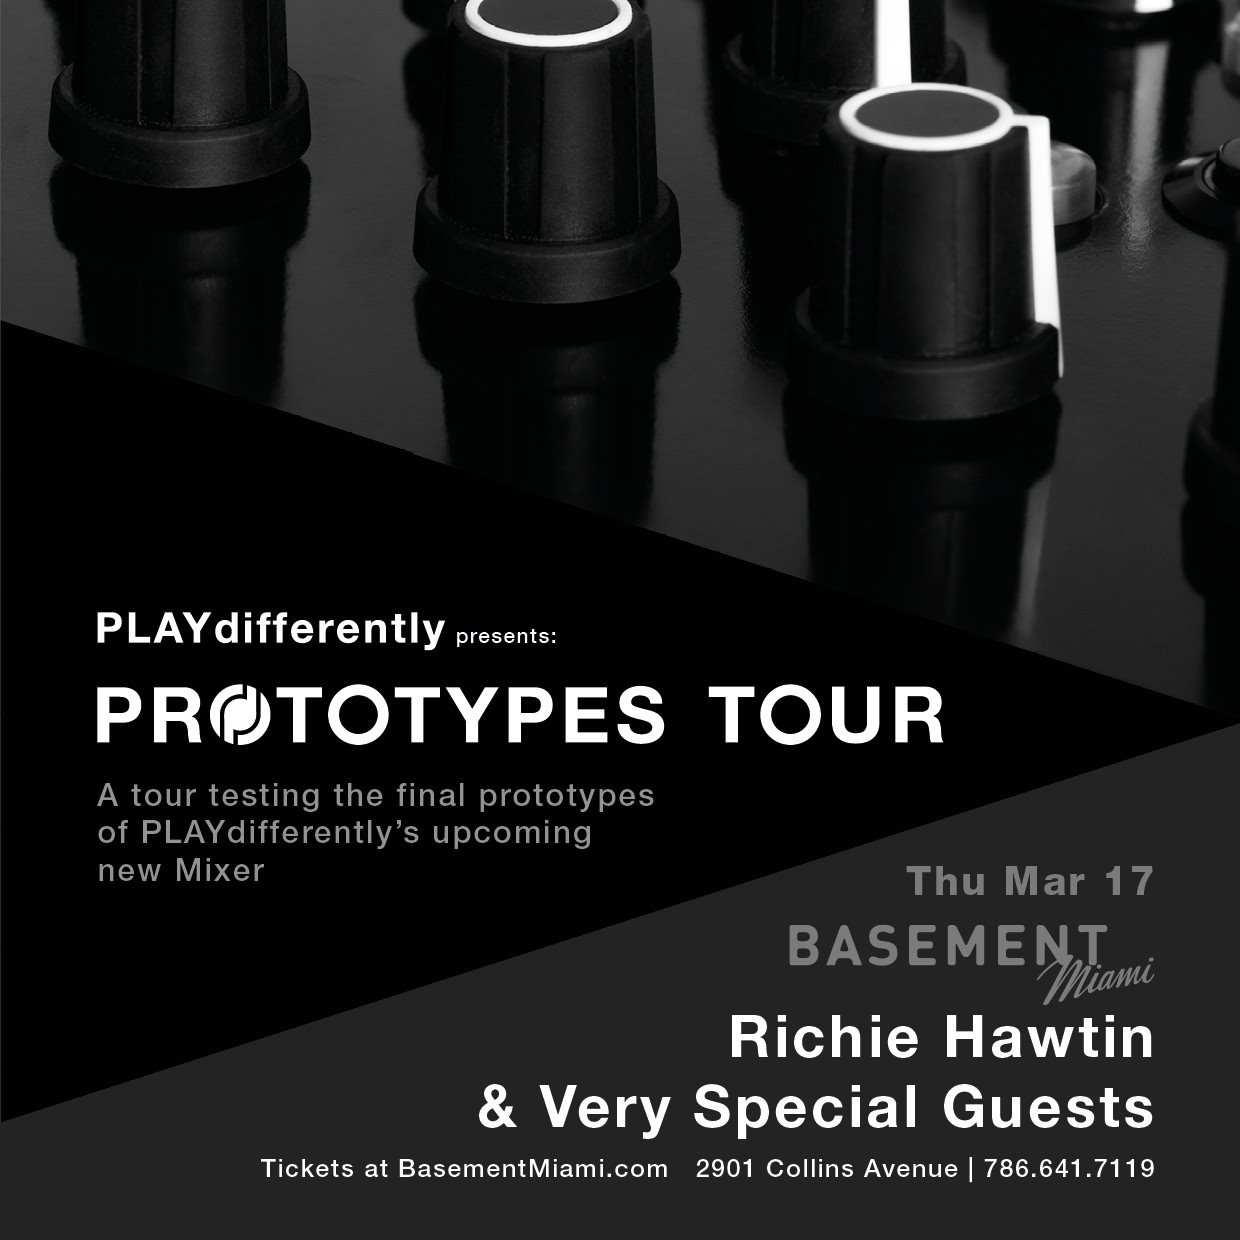 Playdifferently presents Prototypes Tour with Richie Hawtin - Flyer front